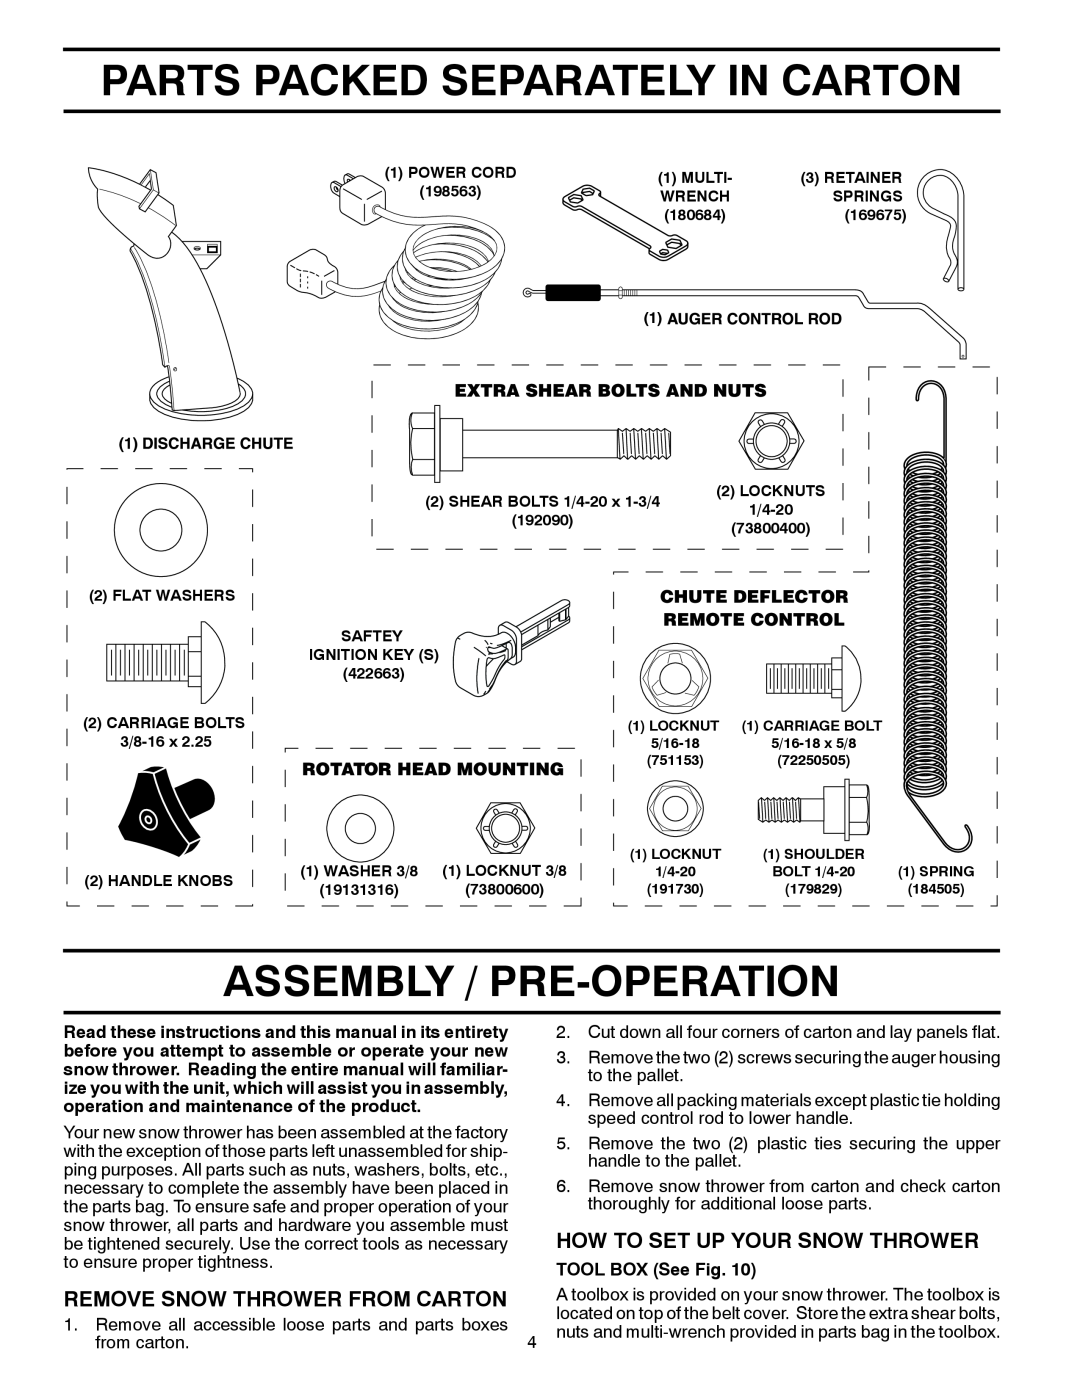 Husqvarna 1830HV, 96193005400 Parts Packed Separately In Carton, Assembly / Pre-Operation, How To Set Up Your Snow Thrower 